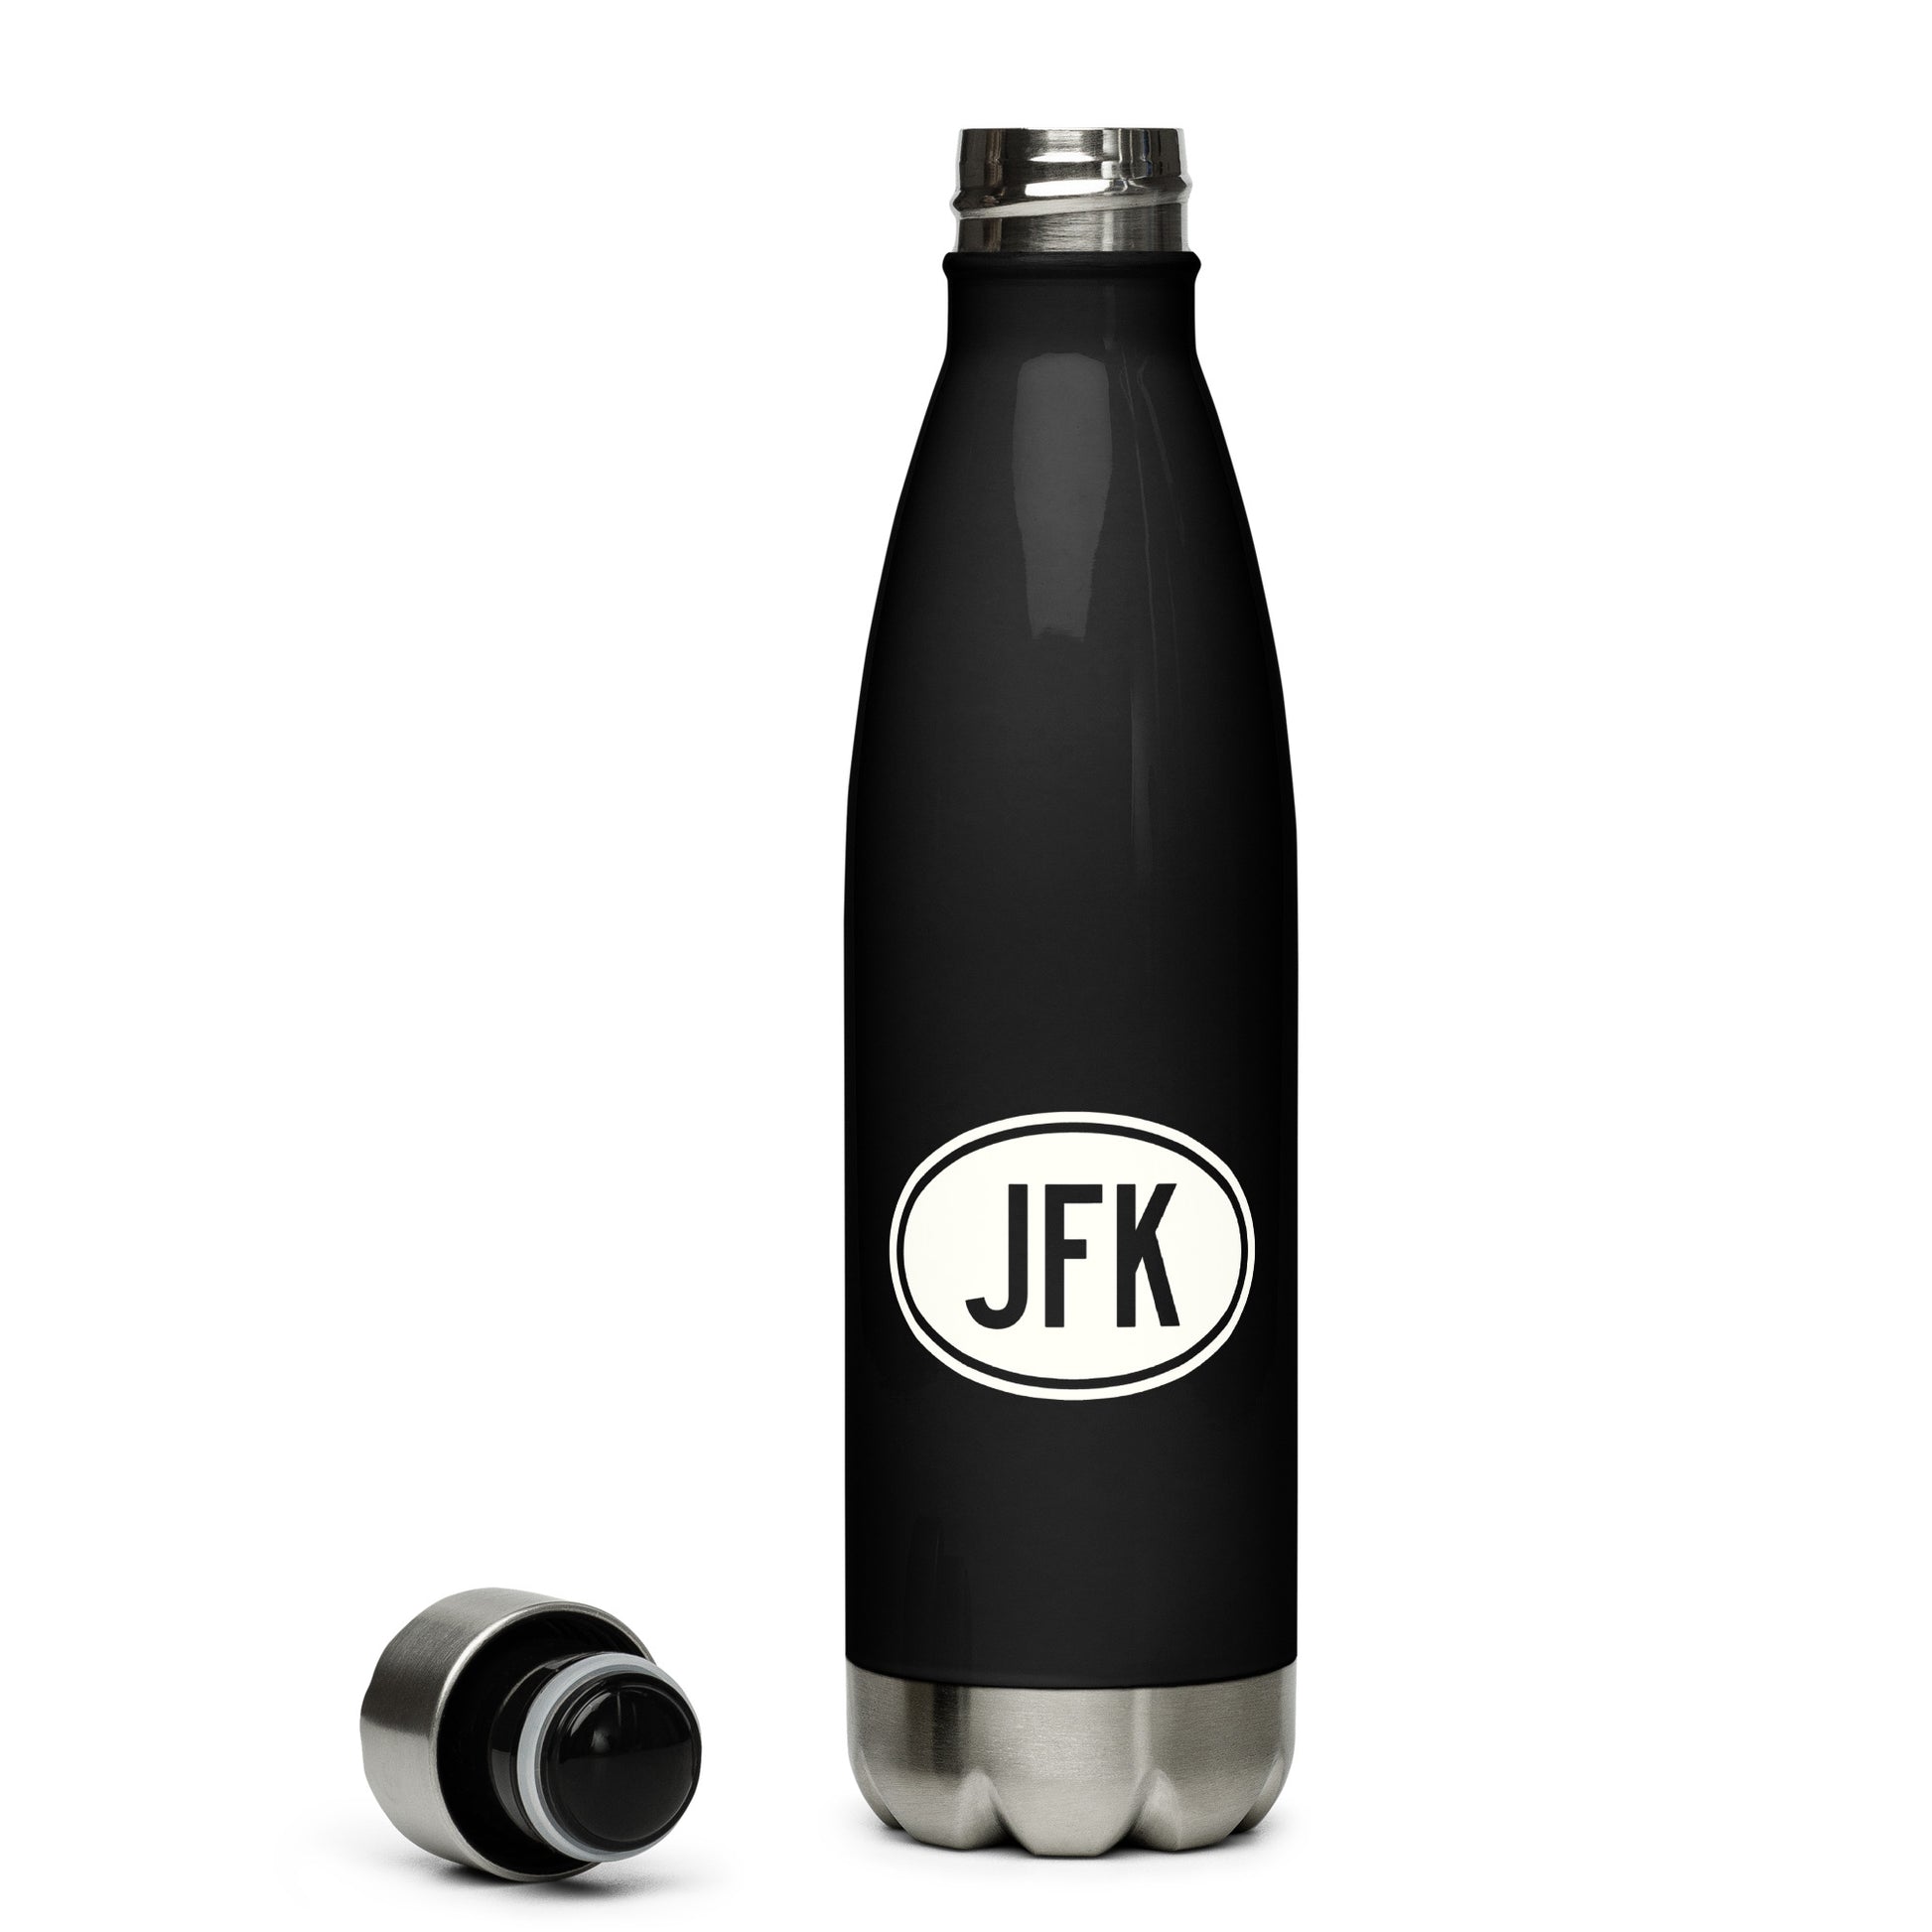 Unique Travel Gift Water Bottle - White Oval • JFK New York City • YHM Designs - Image 04